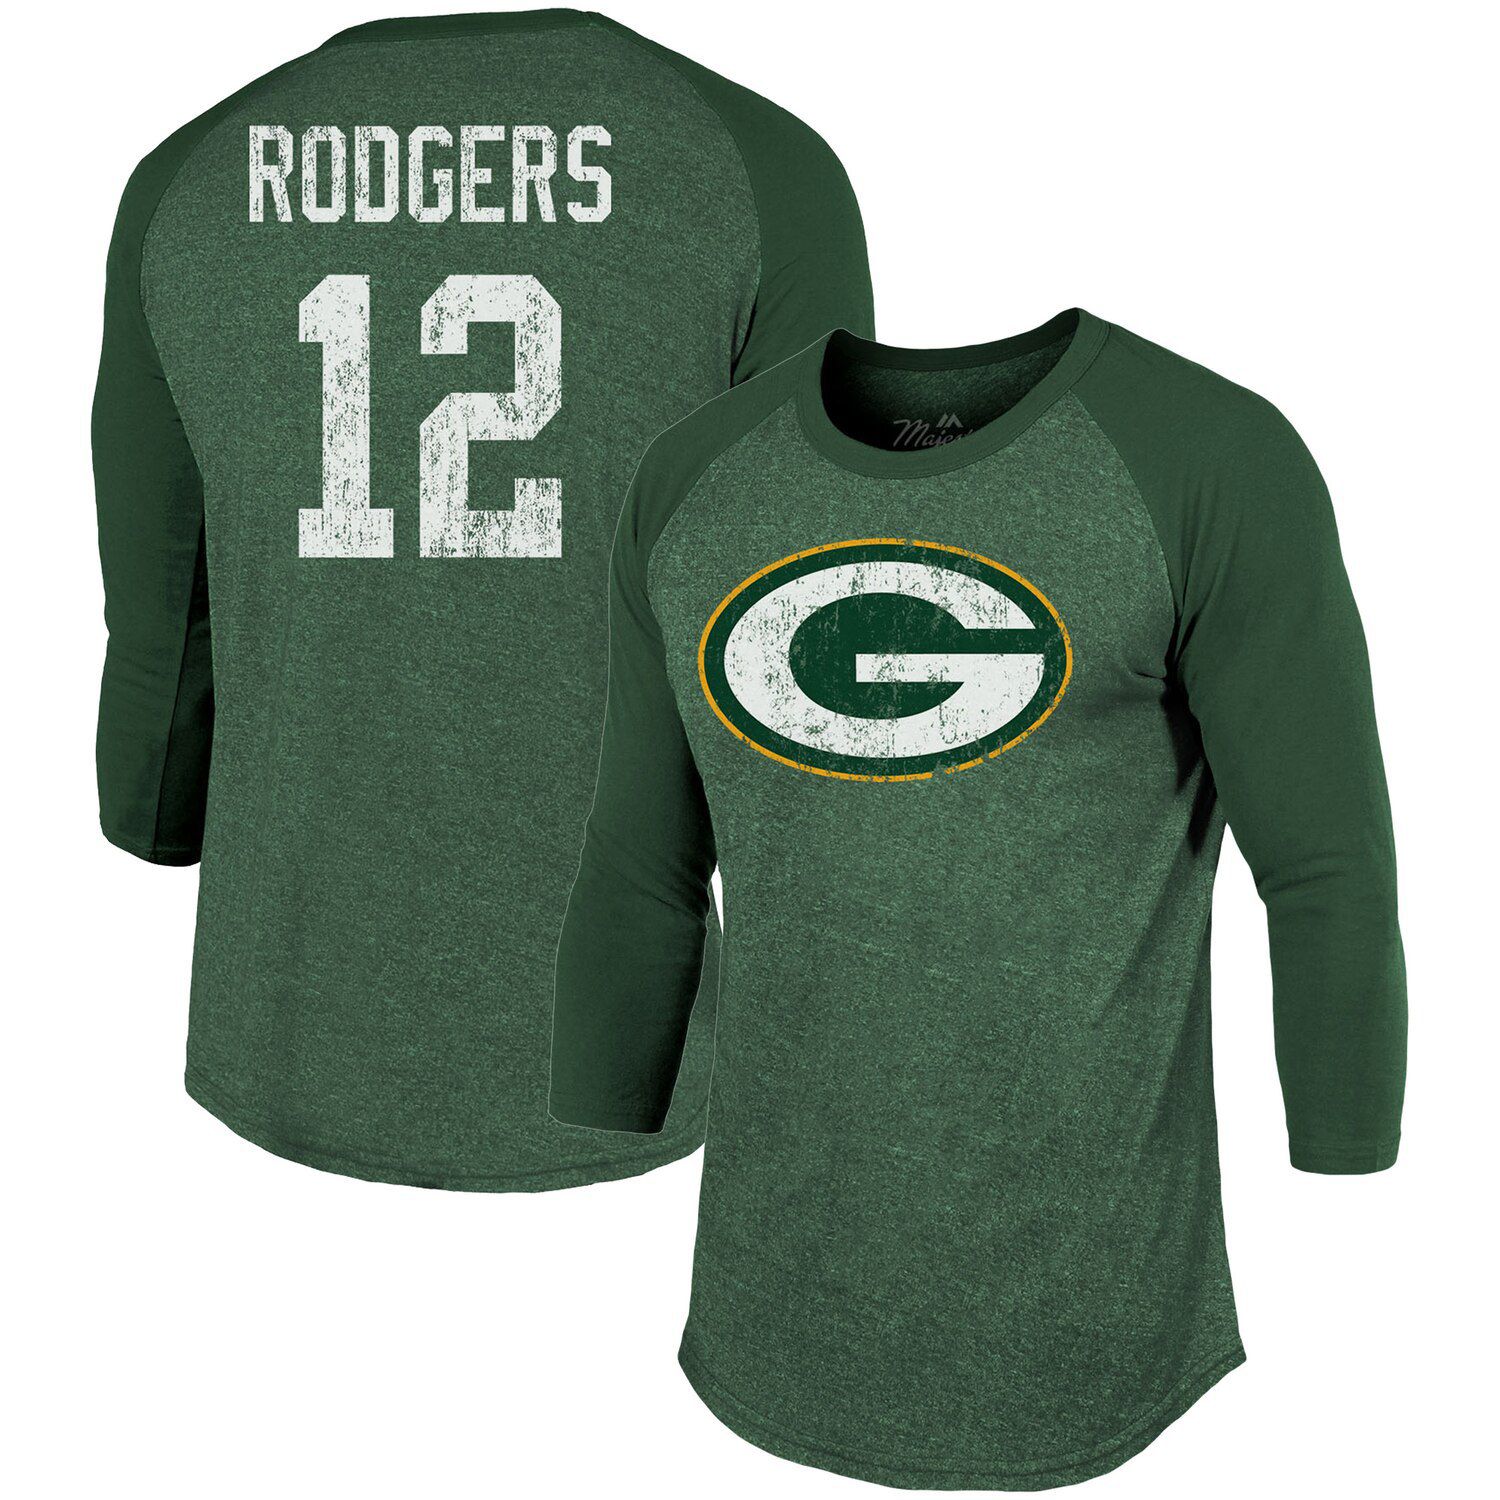 what is aaron rodgers jersey number